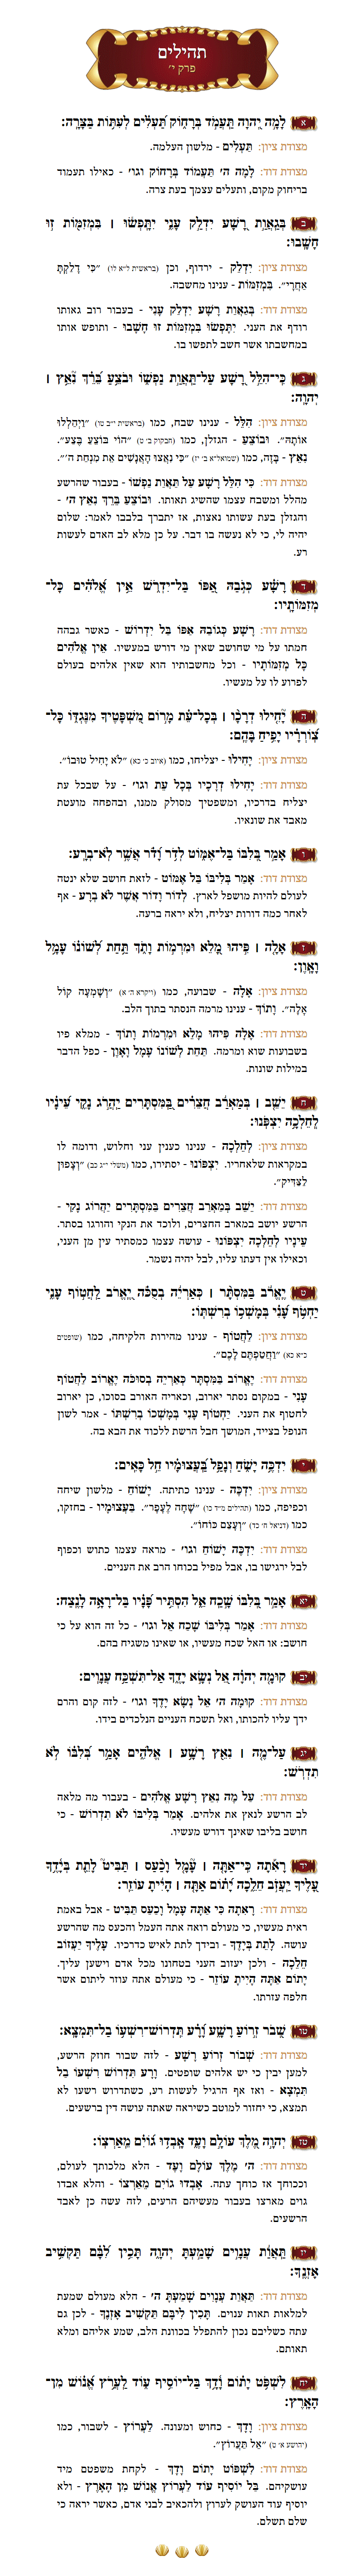 Sefer Tehillim Chapter 10 with commentary